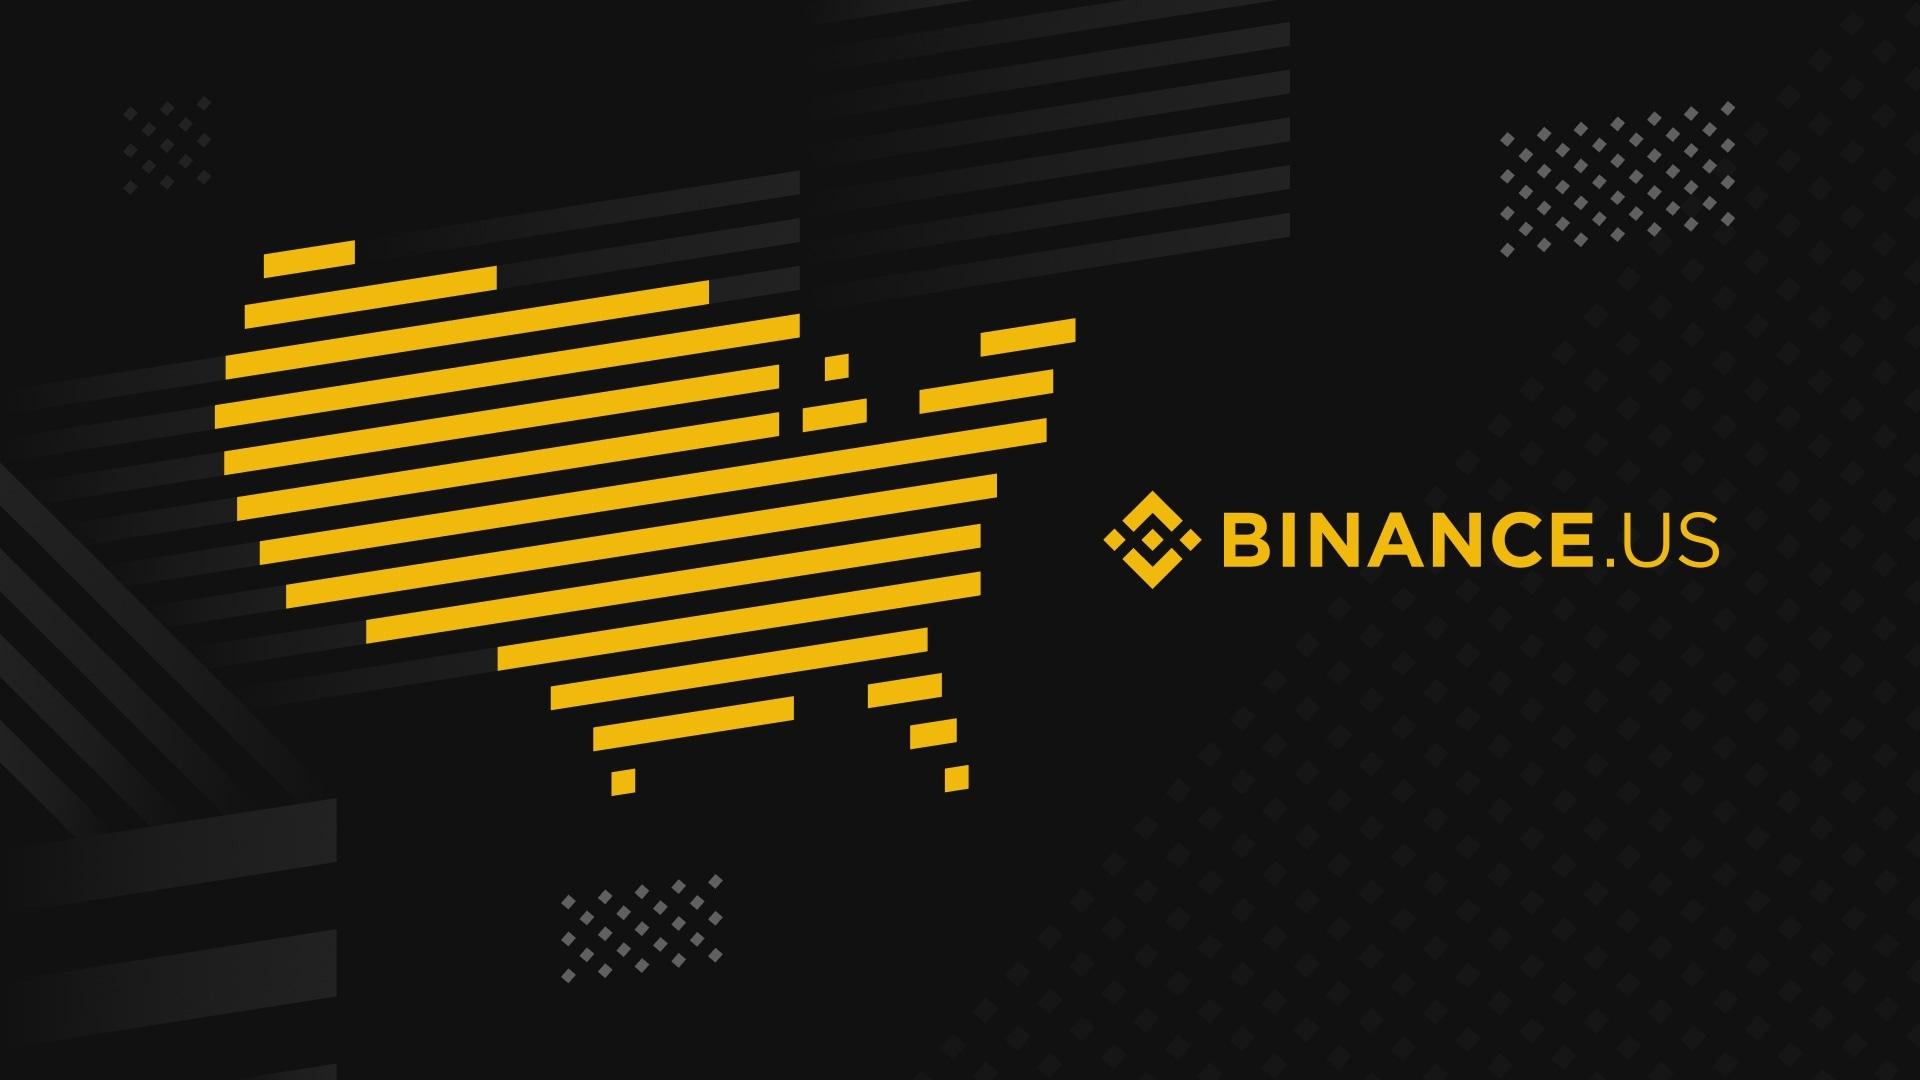 After being sued by SEC, Binance.US opted to pull about 100 trading pairs and suspend its OTC Trading Portal